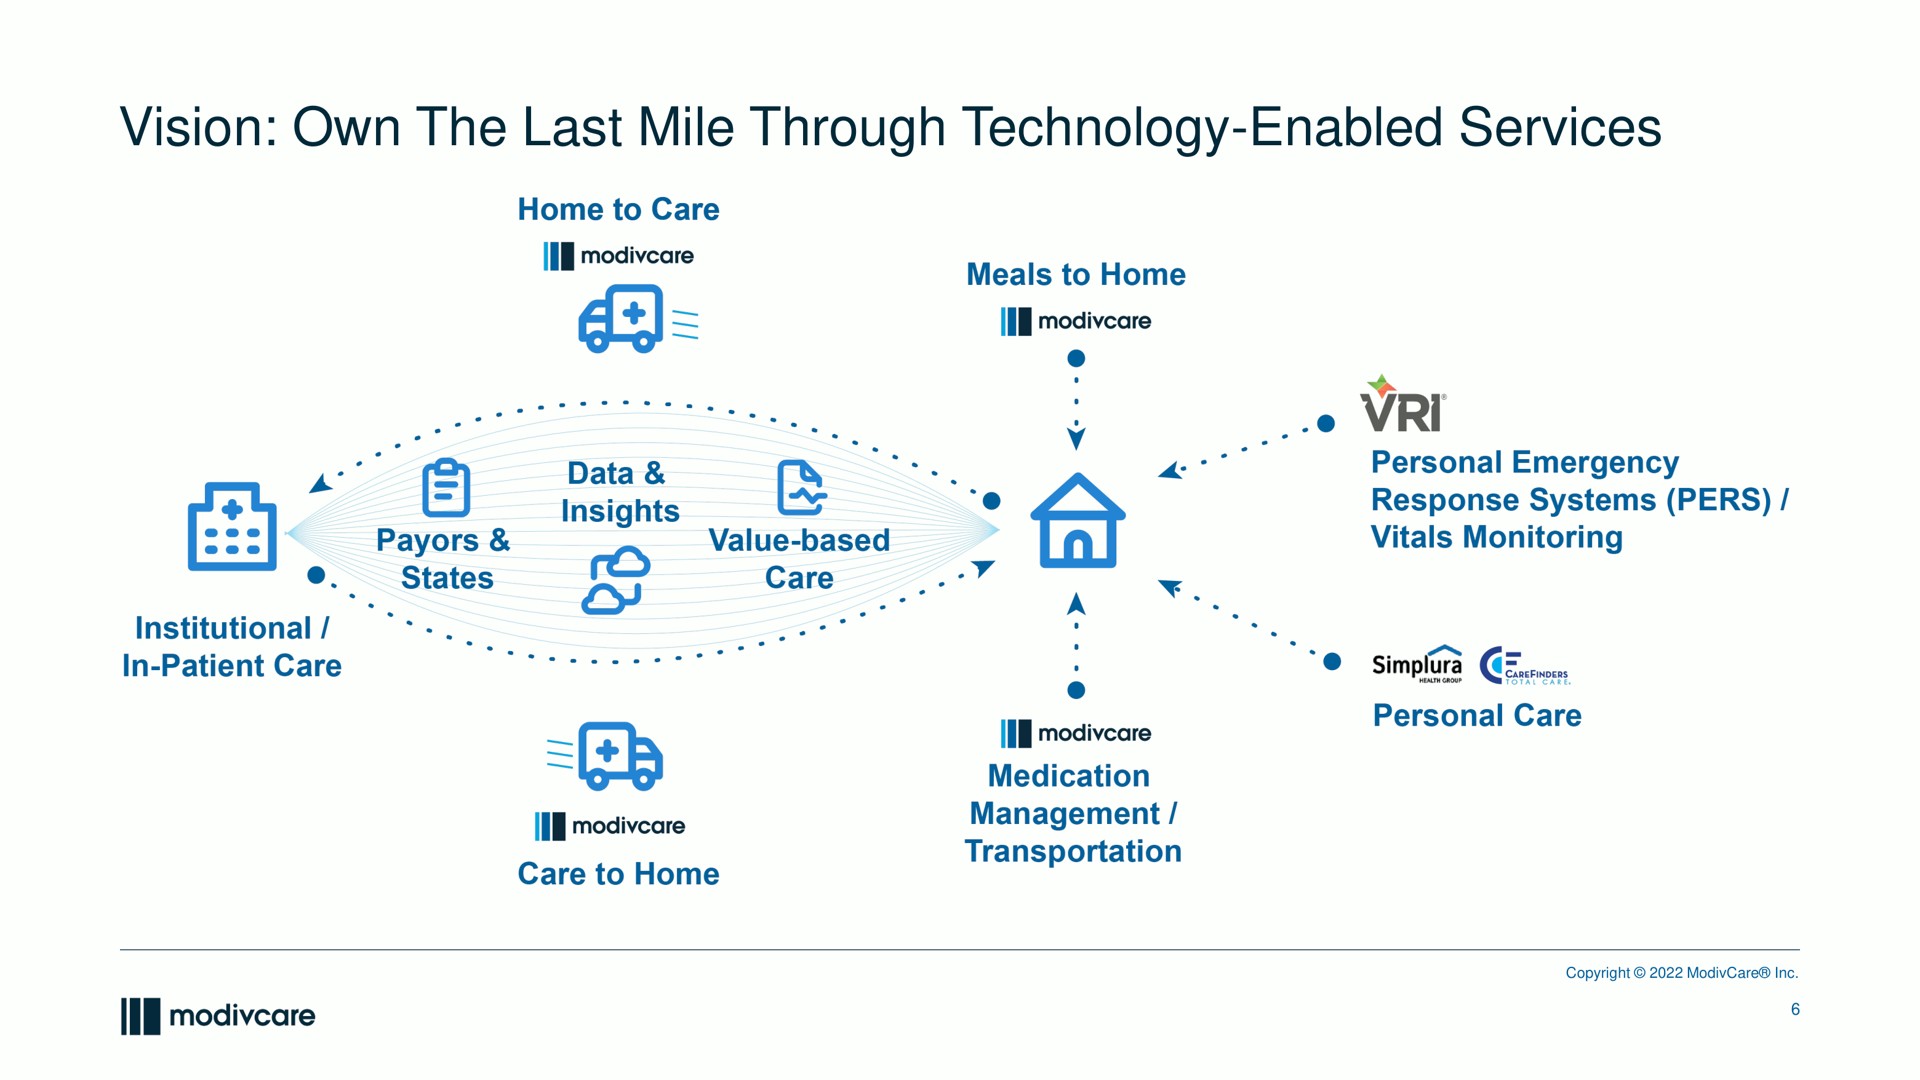 vision own the last mile through technology enabled services states | ModivCare